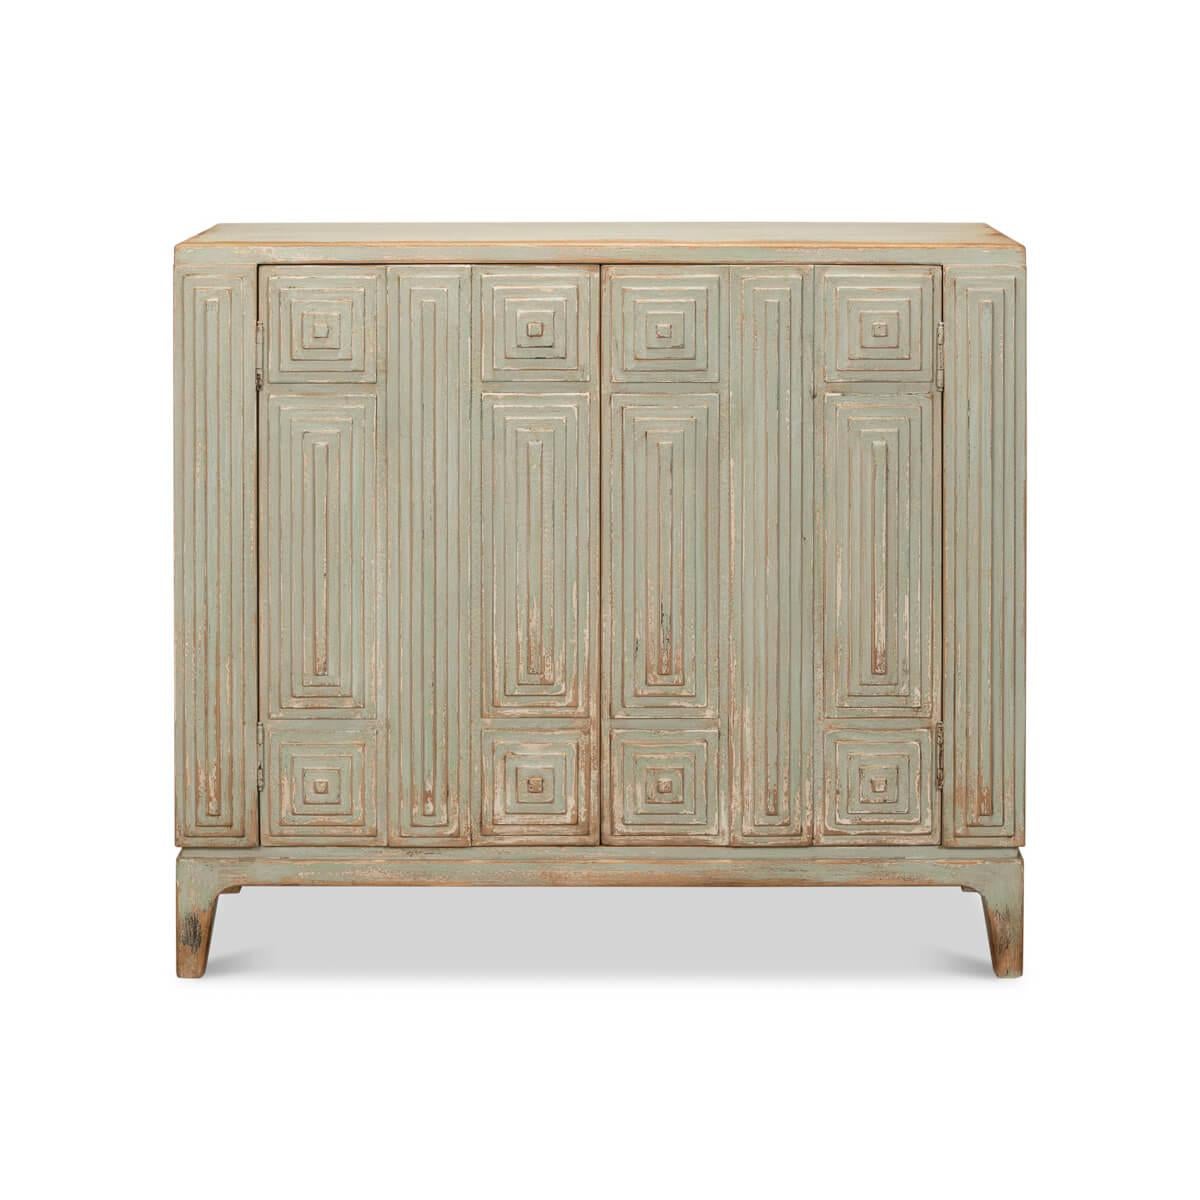 
A statement piece that effortlessly brings historical depth and character to your space. This cabinet, measuring 50 inches in width, 43 inches in height, and 18 inches in depth, is a sizable treasure that promises both form and function.

The